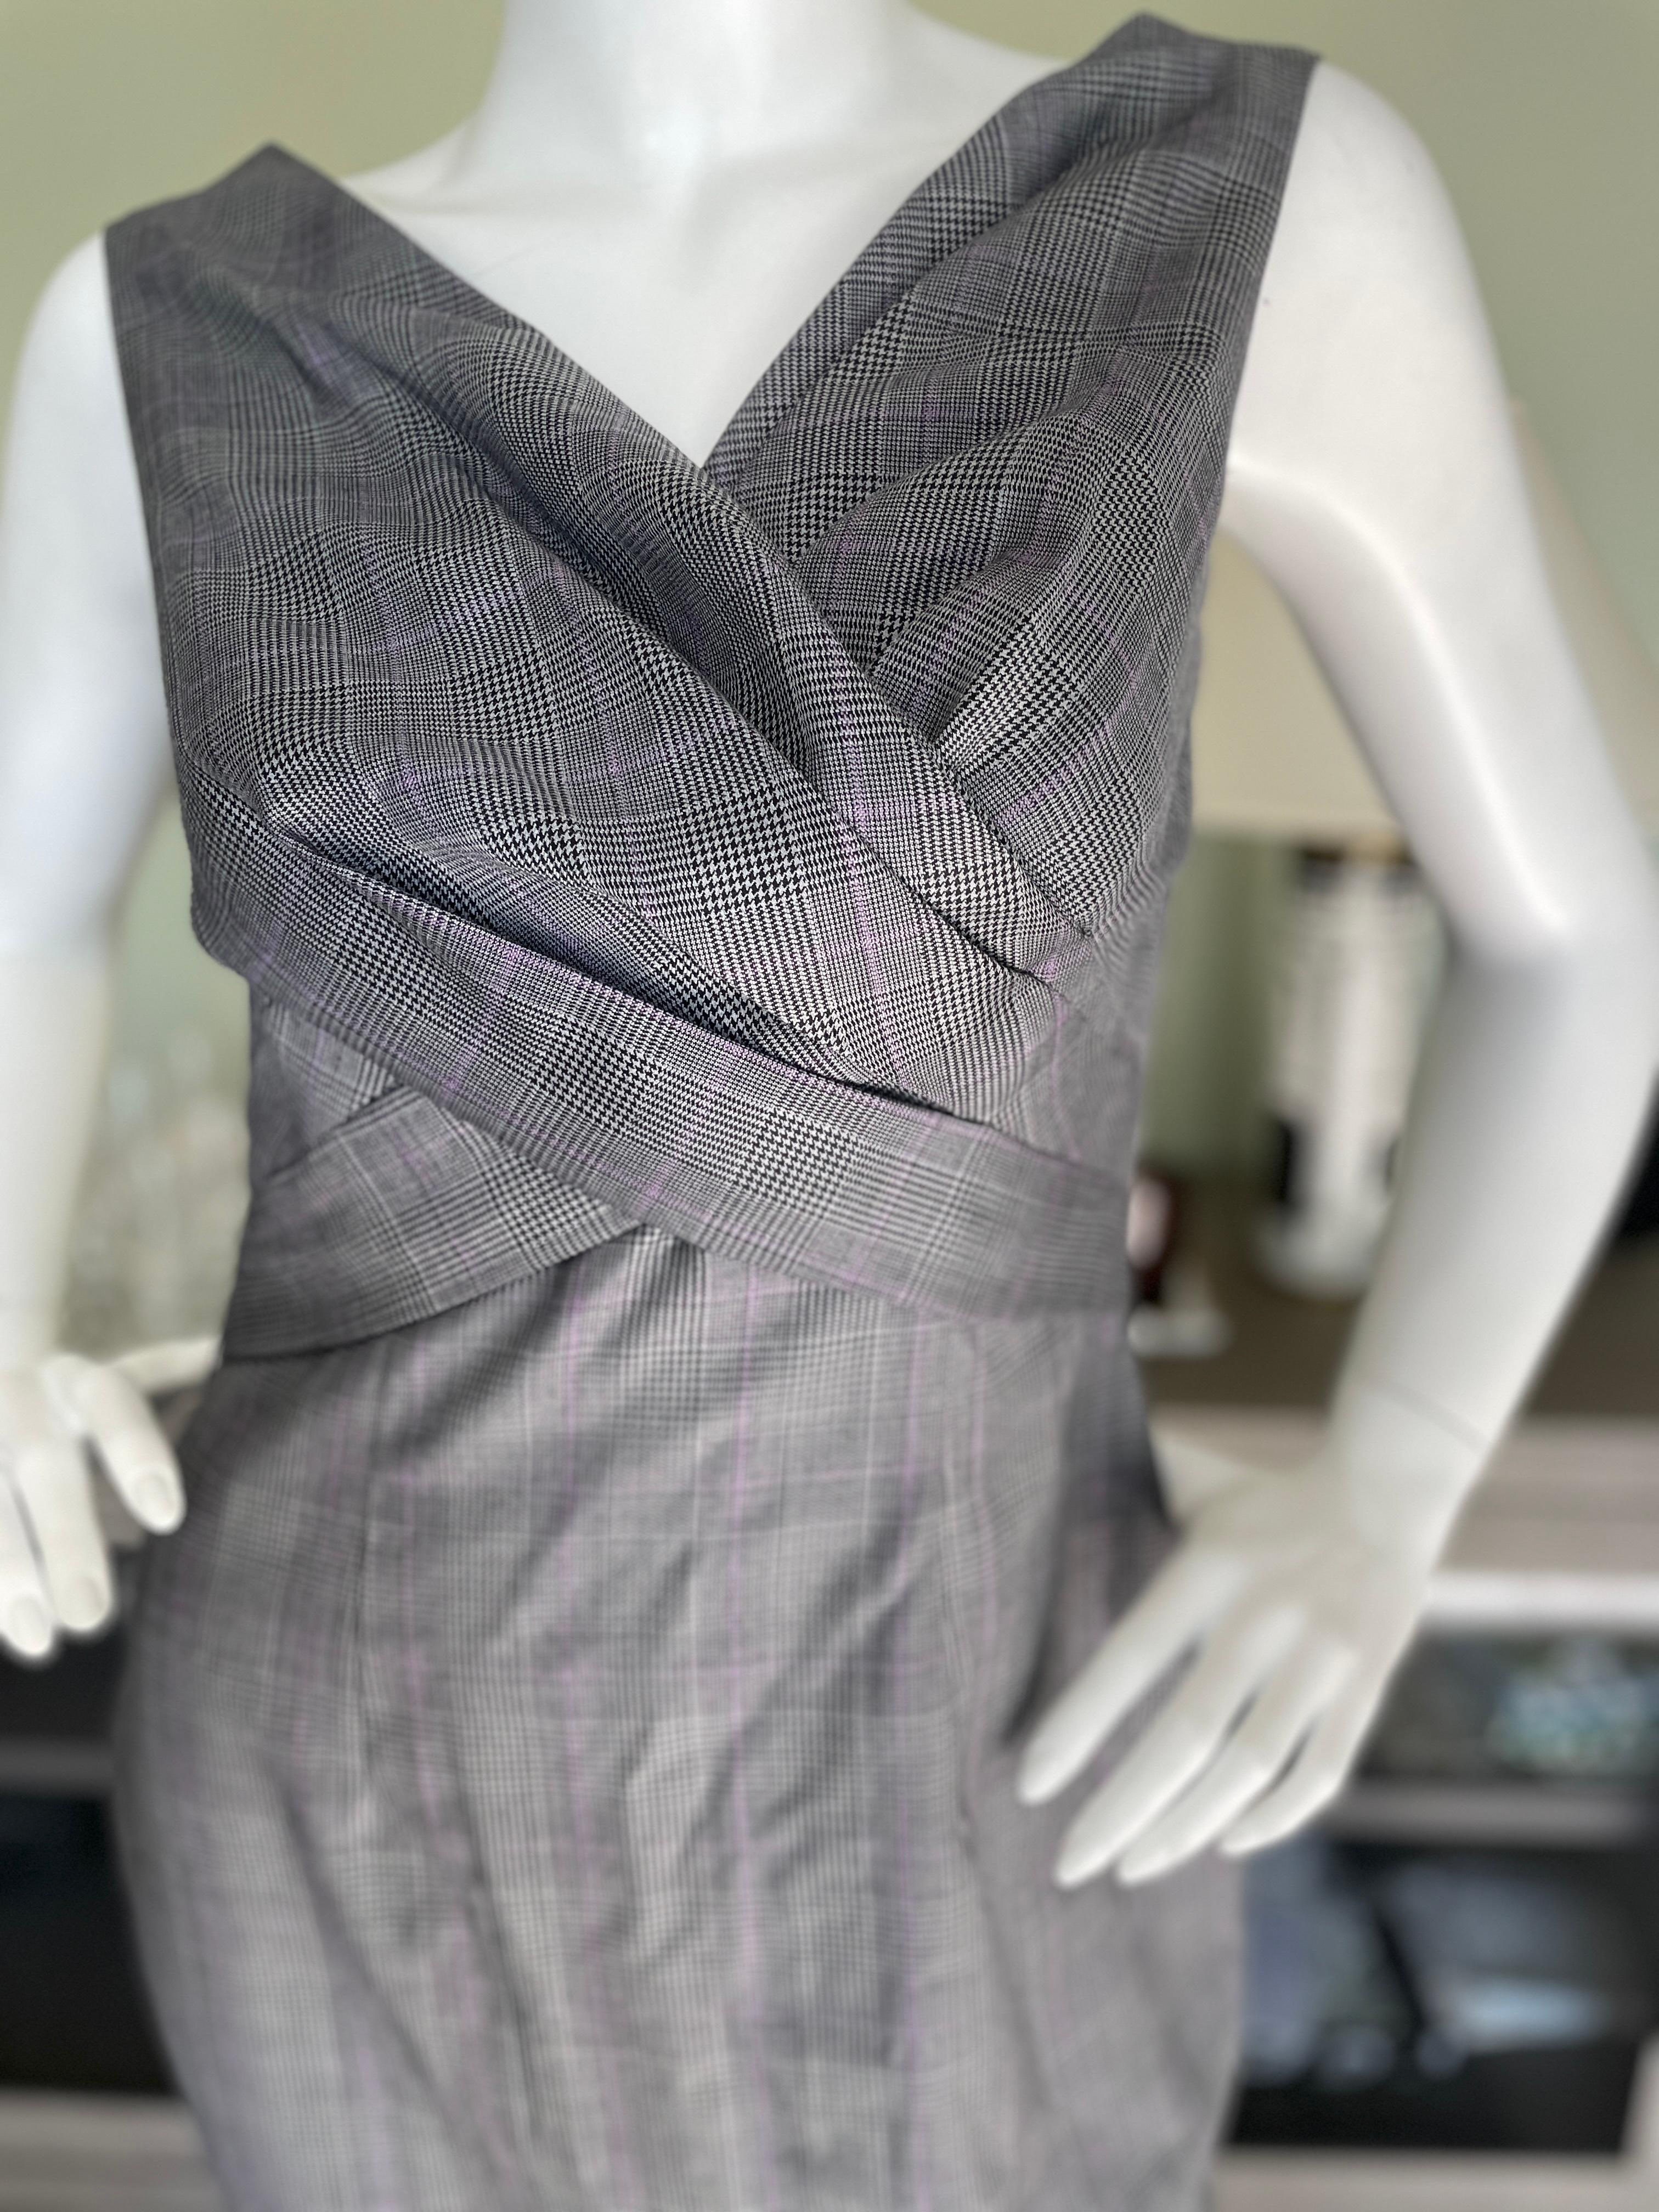 Christian Dior by John Galliano Lightweight Prince of Wales Plaid Day Dress.
Lined in silk, this is much prettier in person.
Size 40
  Bust 36